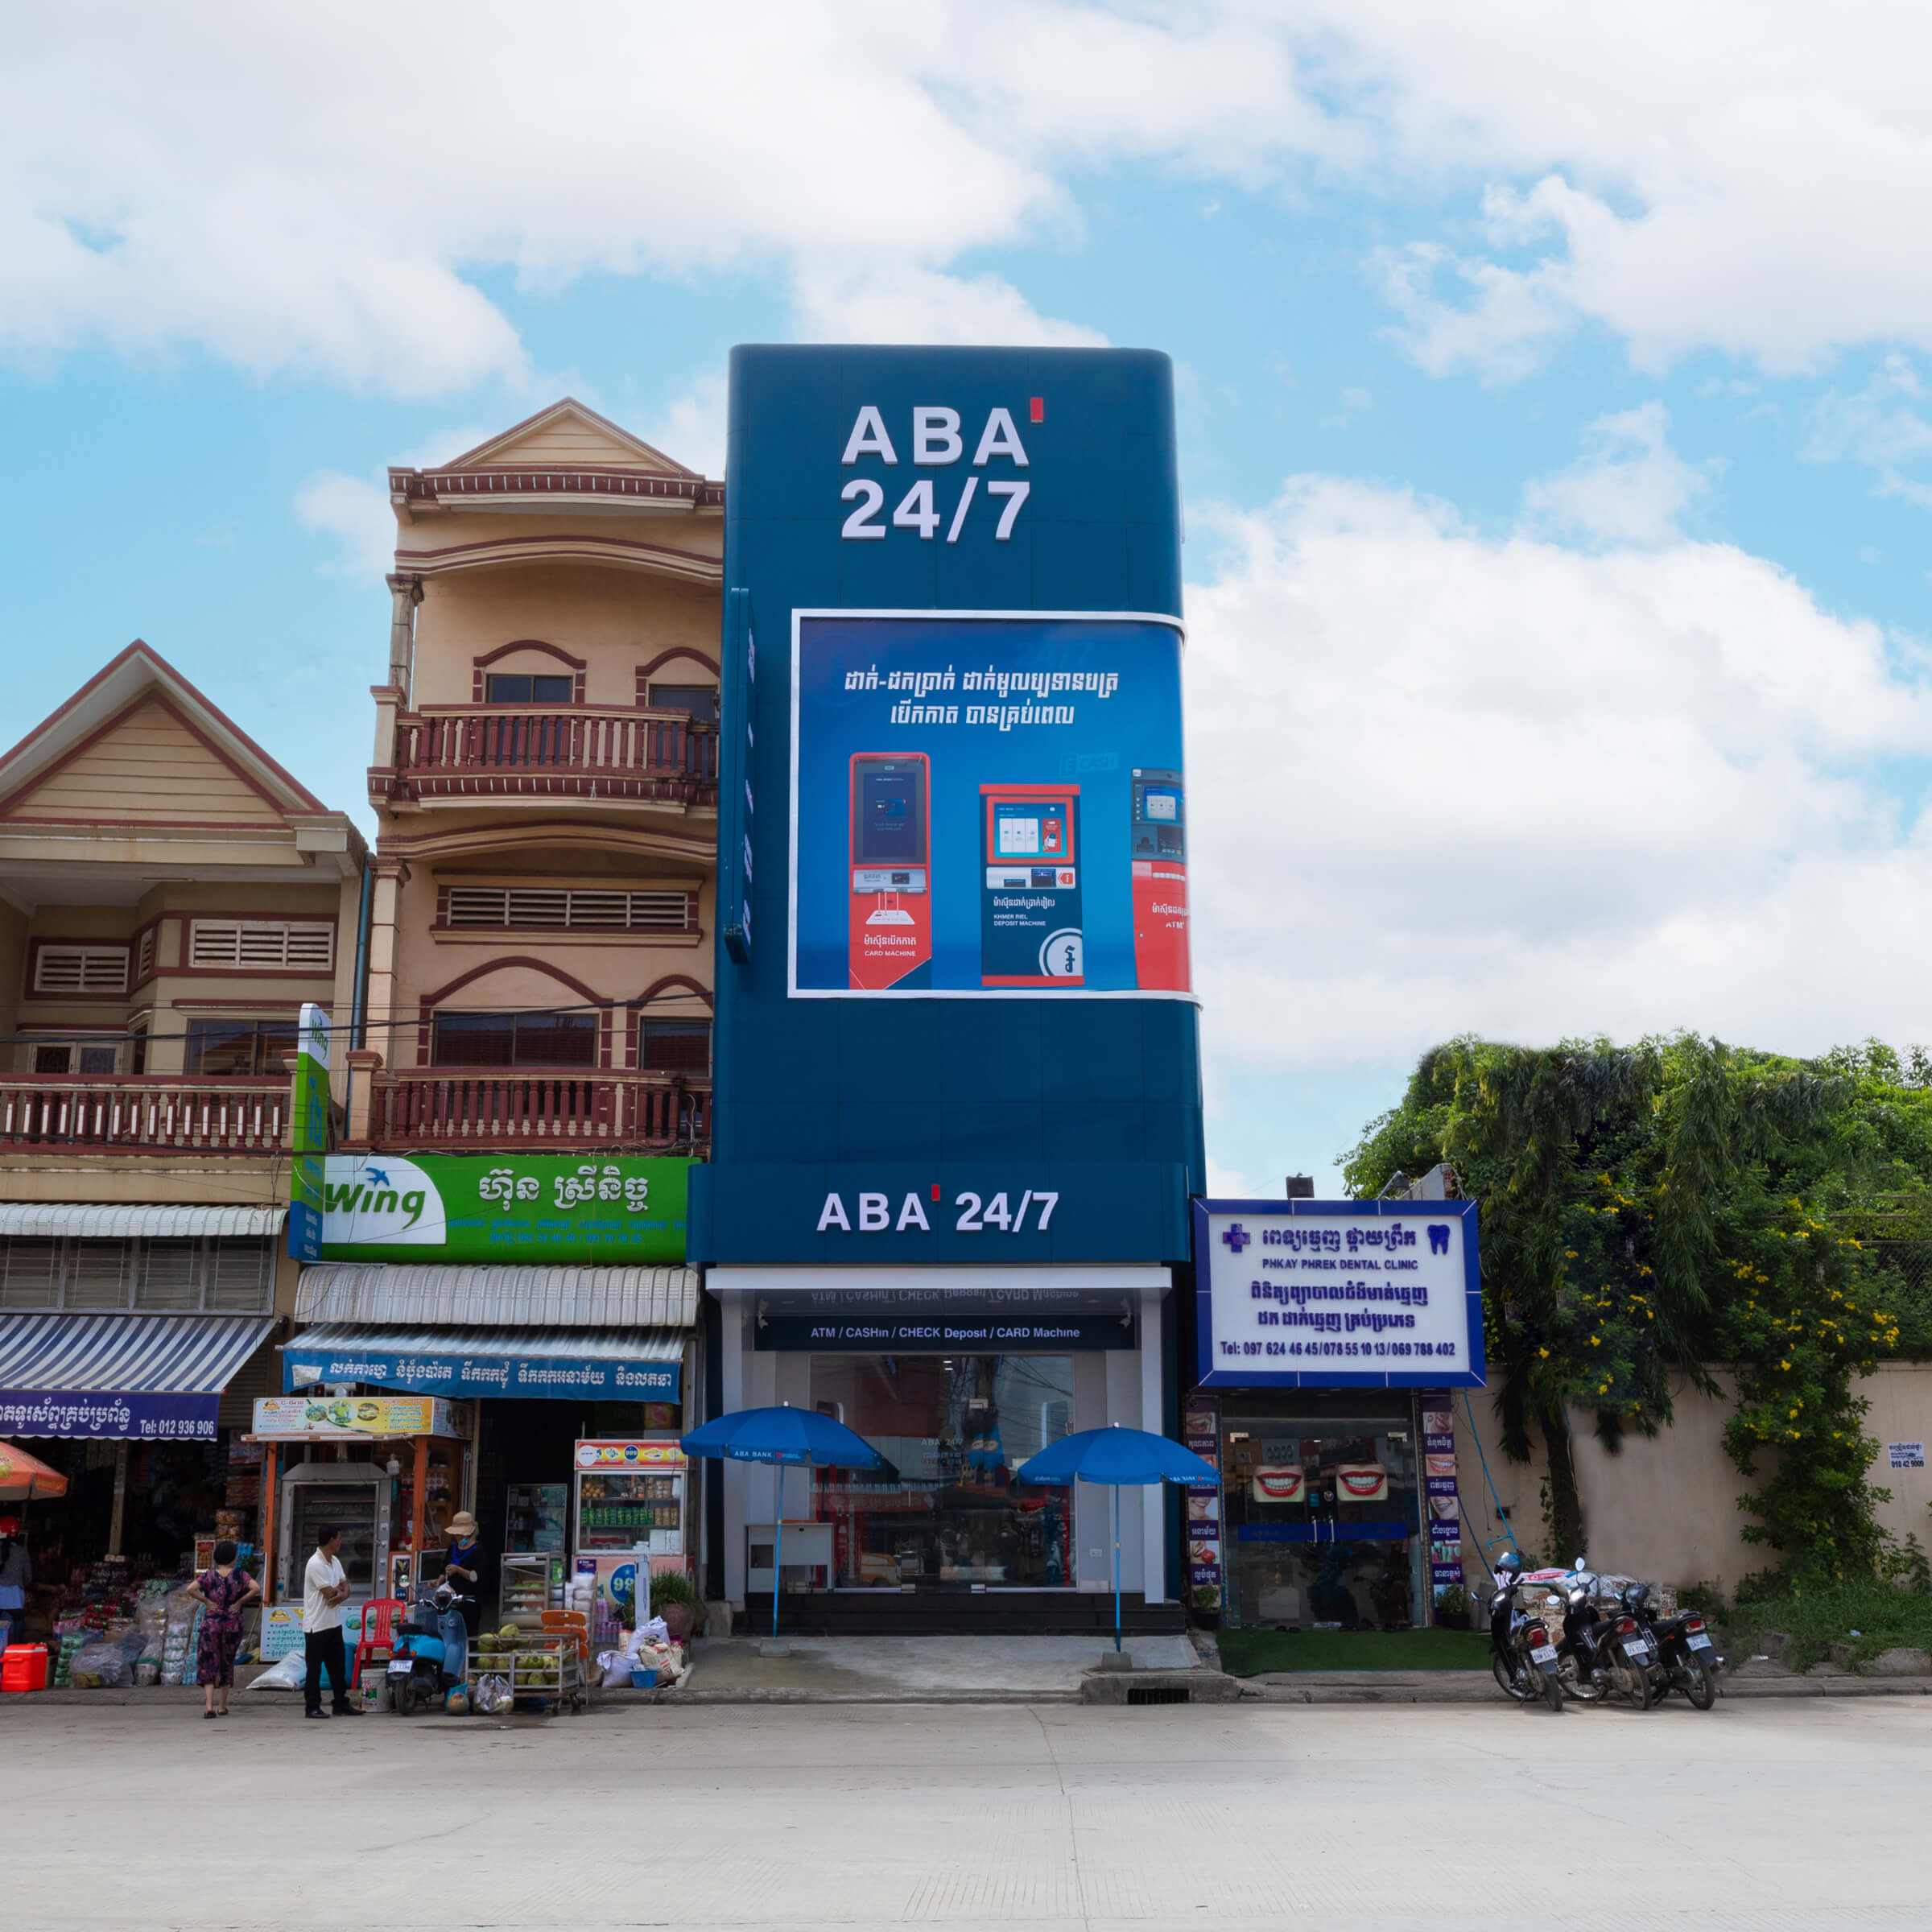 ABA​ 24/7​ self-banking​ spot​ launches​ in​ Prek​ Pnov​ area